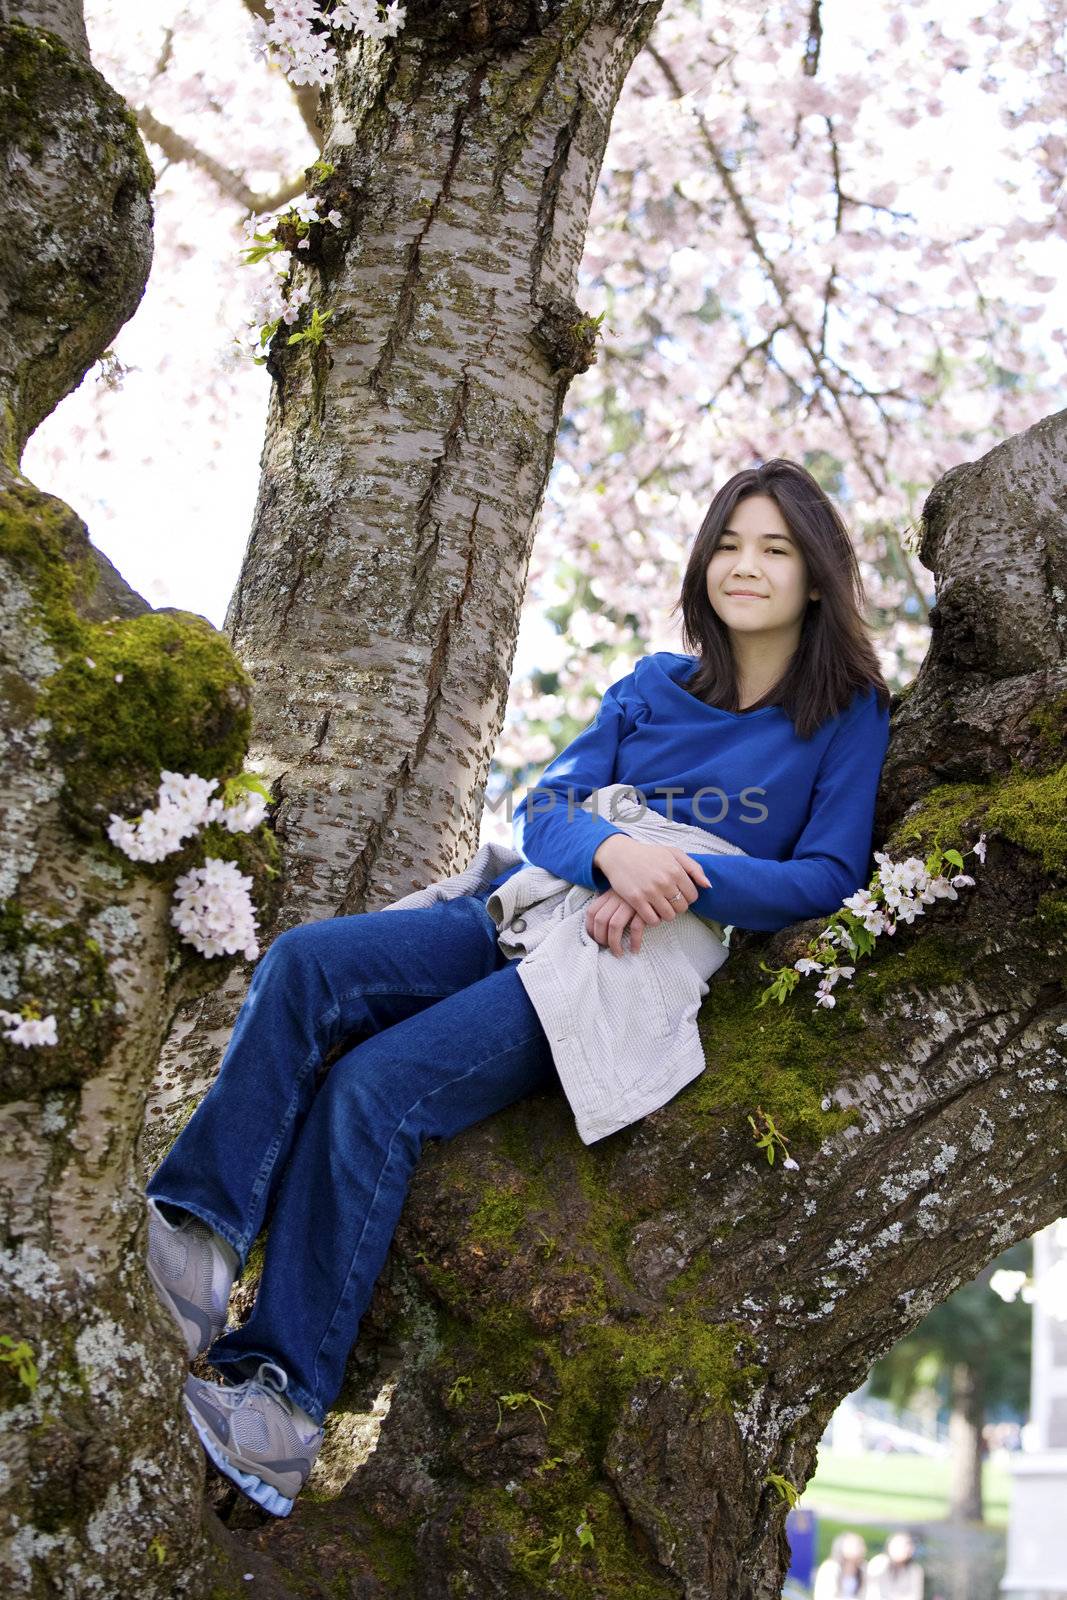 Young teen girl sitting in cherry tree in full bloom by jarenwicklund